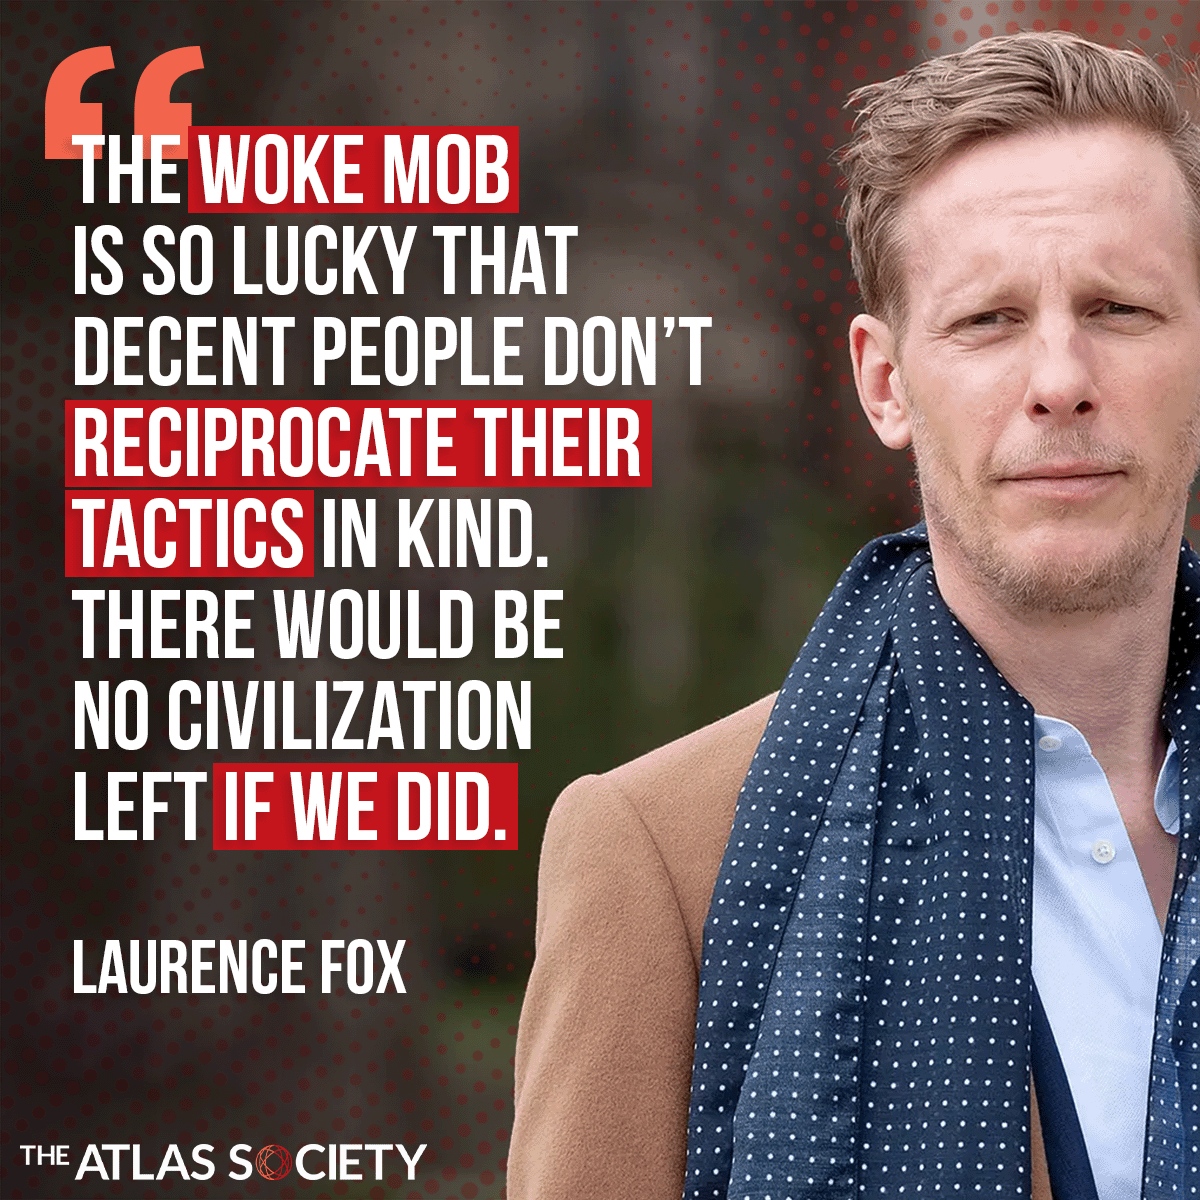 We Won't Descend to Their Level -- But Imagine if We Did... #LaurenceFox #AynRand